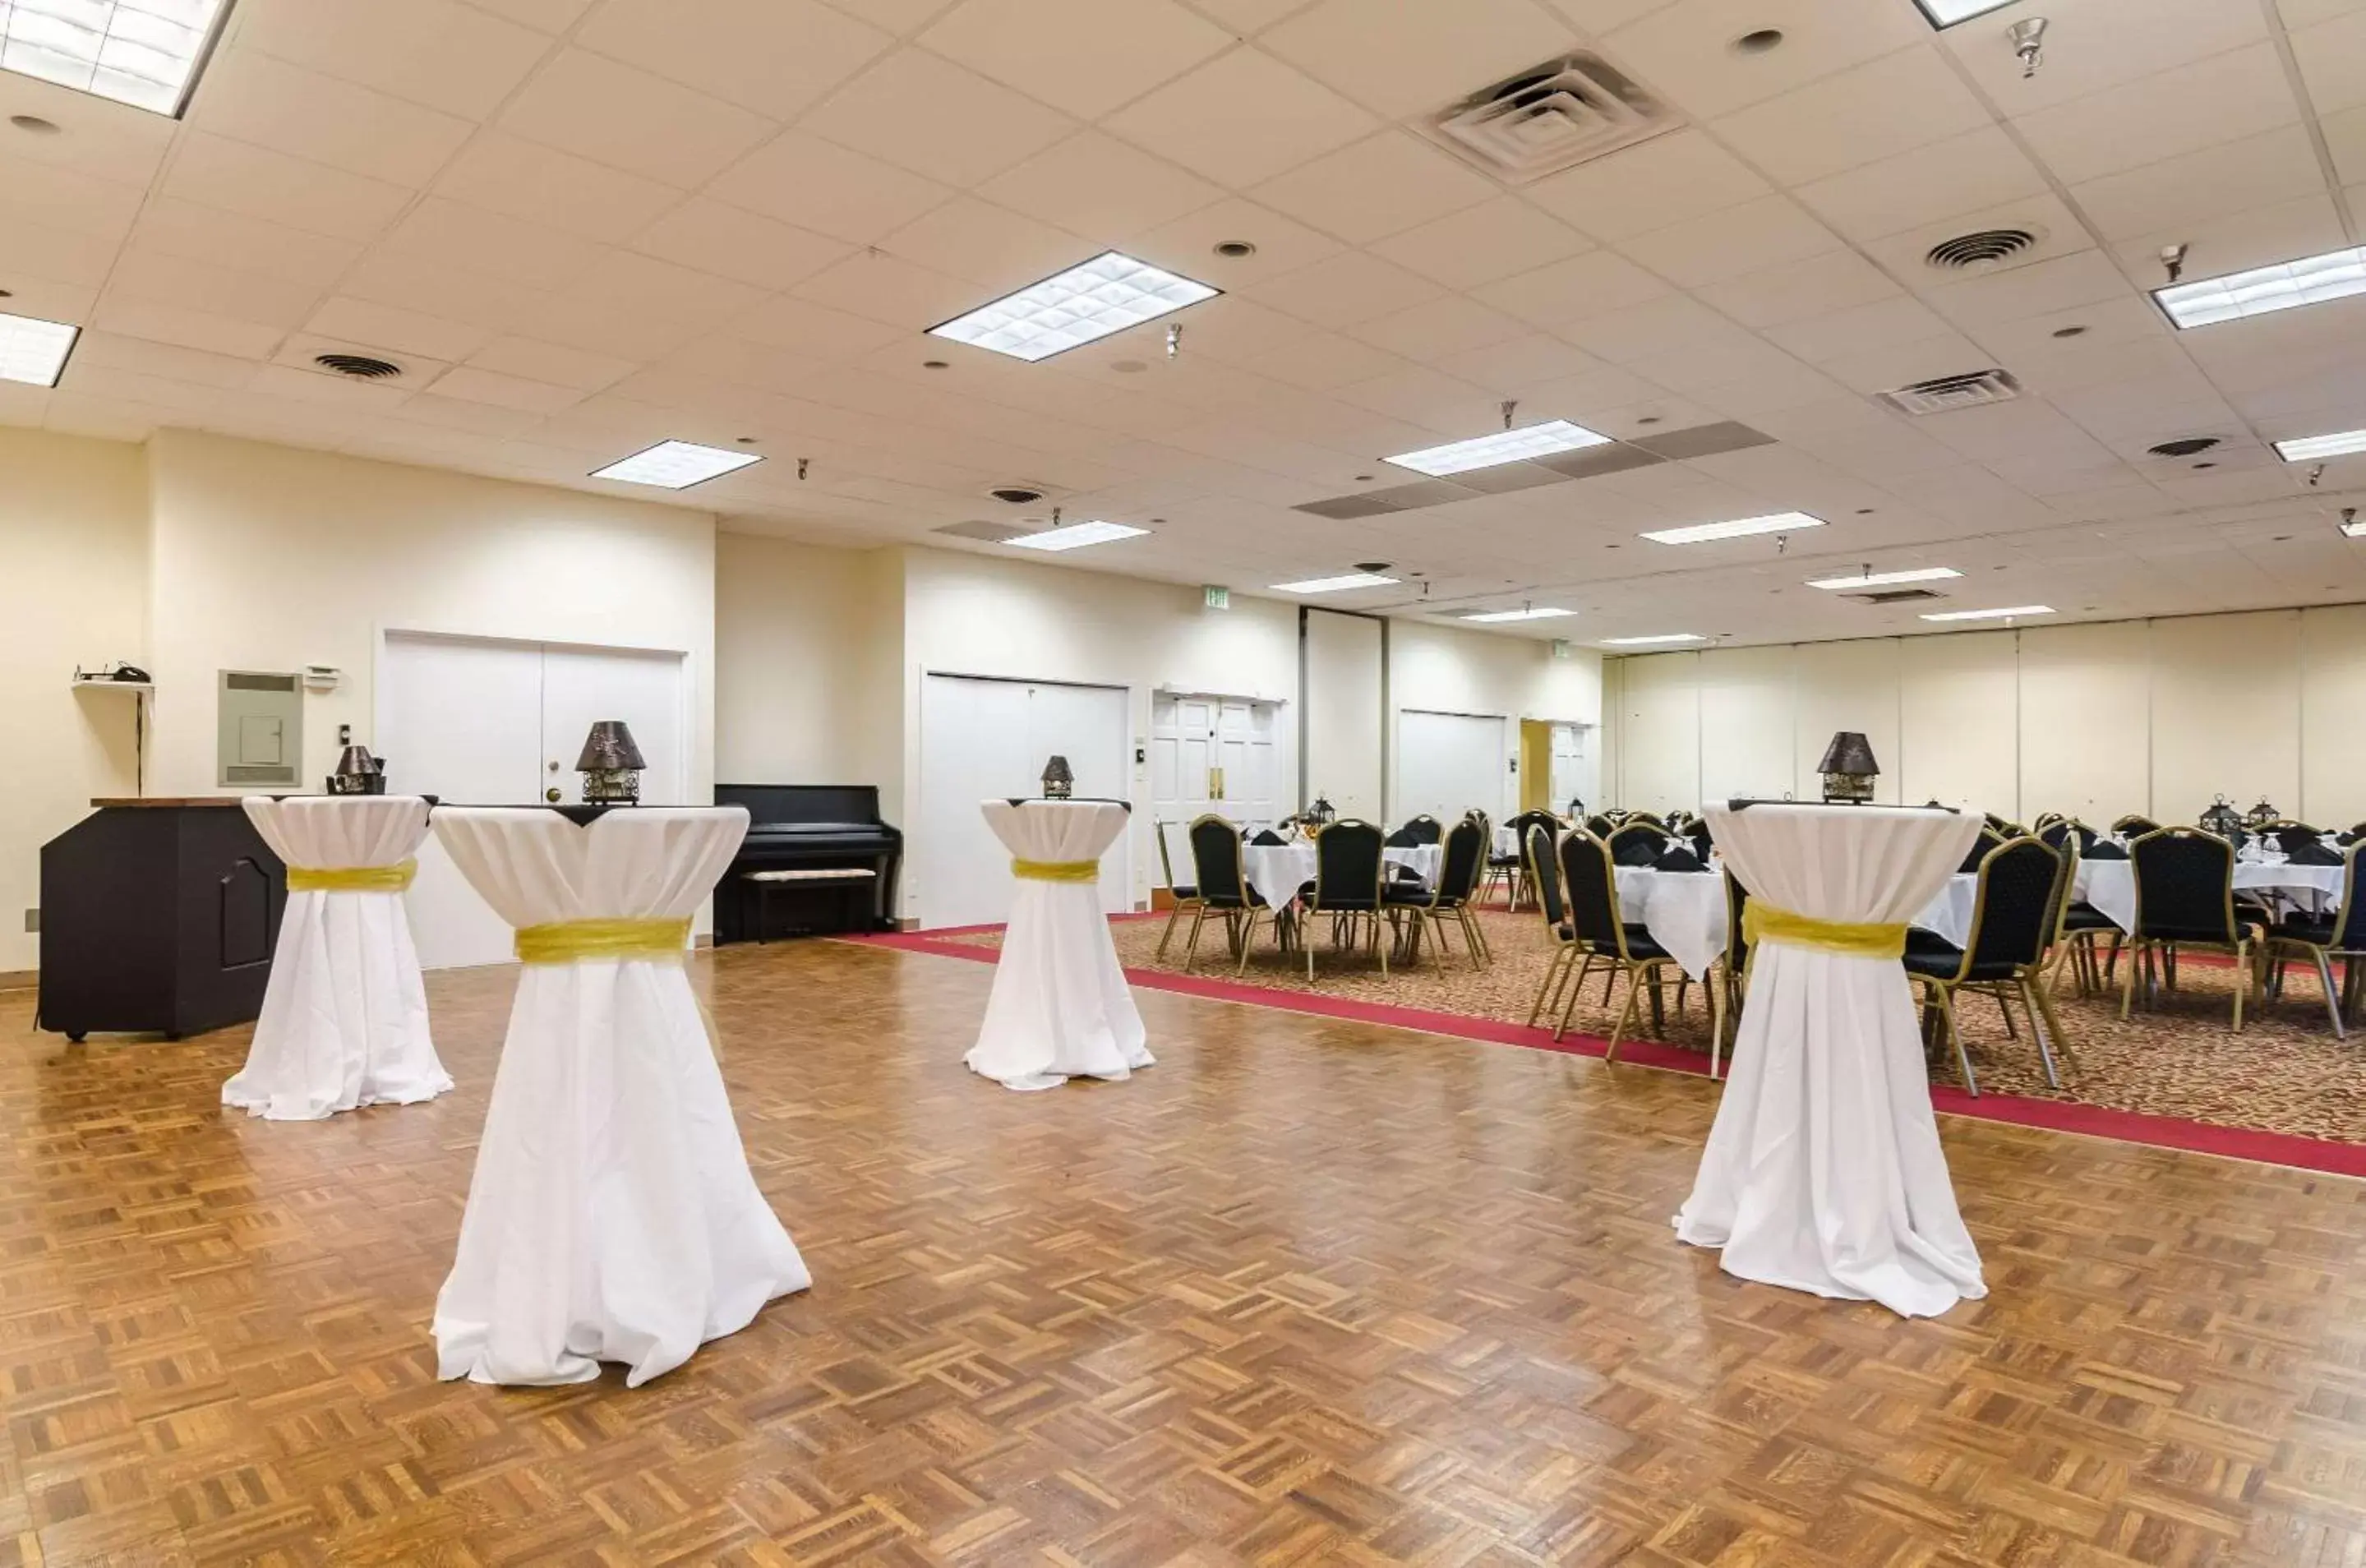 On site, Banquet Facilities in Quality Inn & Suites